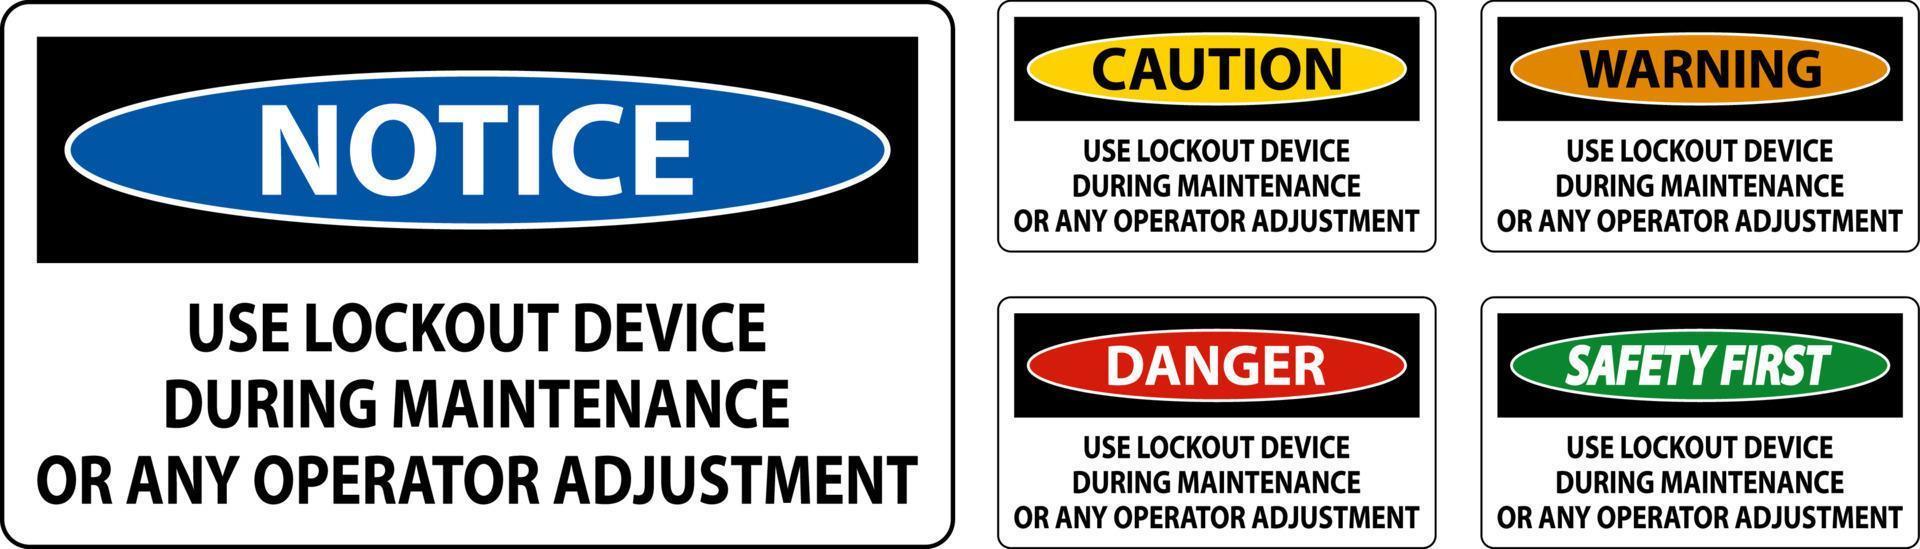 Caution Use Lockout Device During Maintenance Or Any Operator Adjustment Sign vector